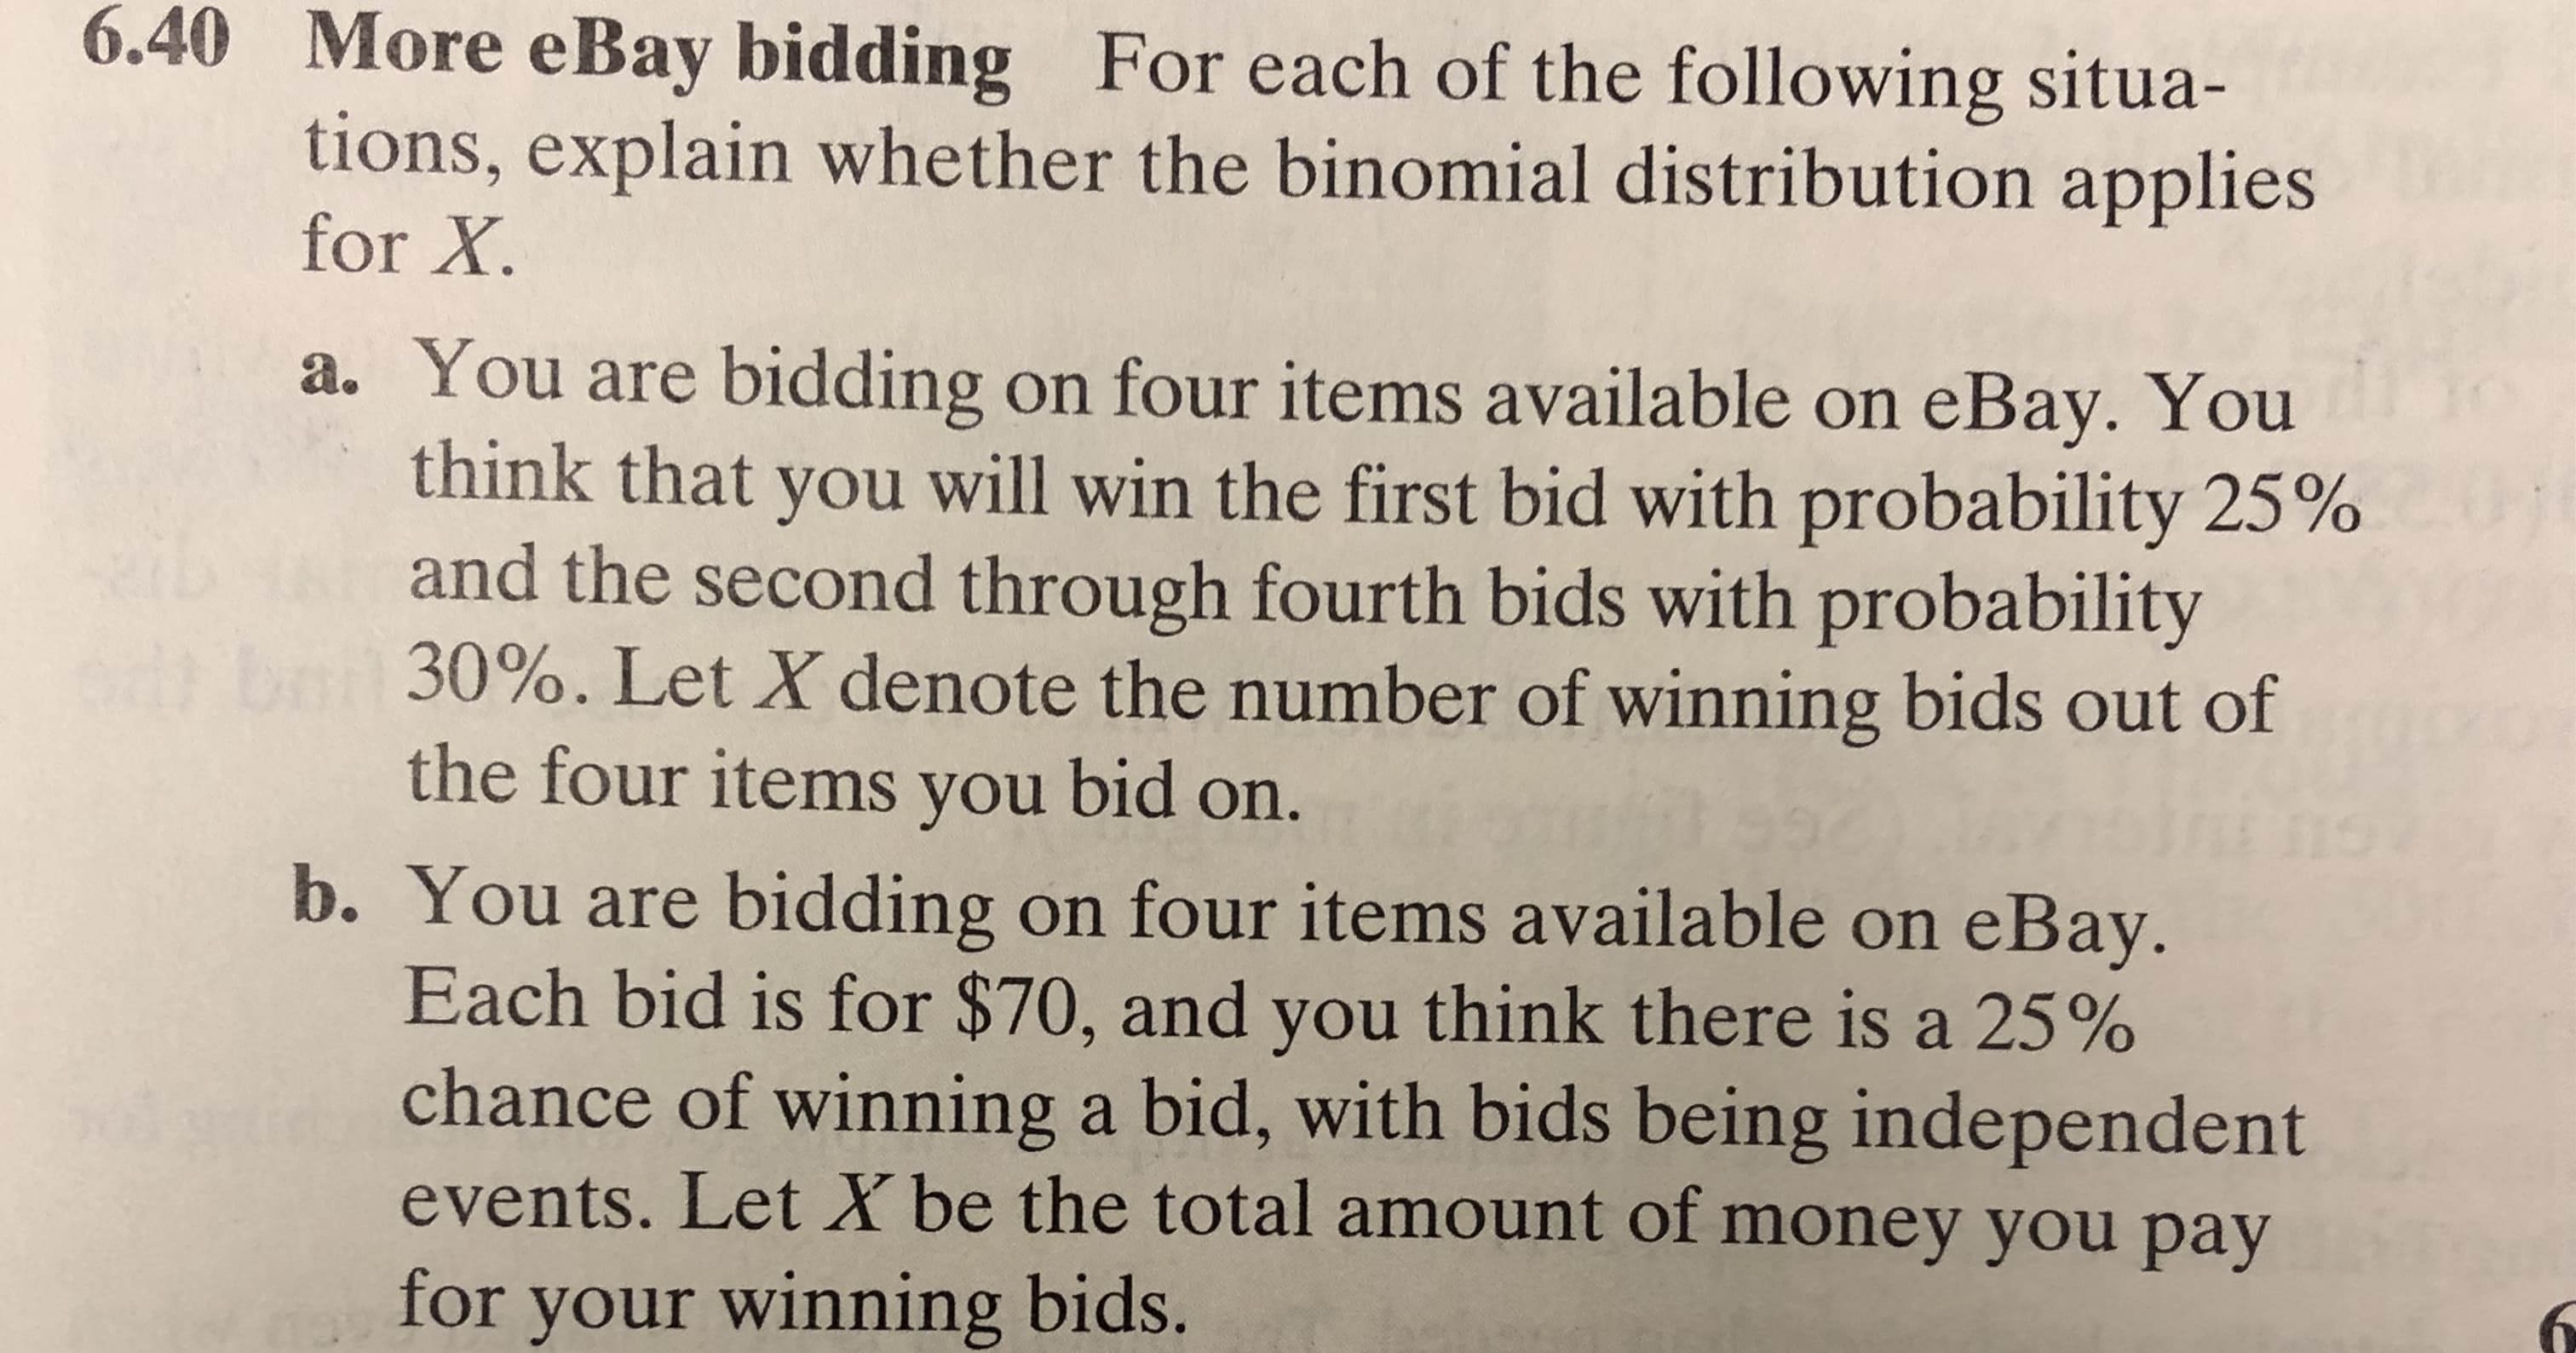 6.40
More eBay bidding For each of the following situa-
tions, explain whether the binomial distribution applies
for X
a. You are bidding on four items available on eBay. You
think that you will win the first bid with probability 25%
and the second through fourth bids with probability
30%. Let X denote the number of winning bids out of
the four items you bid on.
b. You are bidding on four items available on eBay.
Each bid is for $70, and you think there is a 25%
chance of winning a bid, with bids being independent
events. Let X be the total amount of money you pay
for your winning bids.
